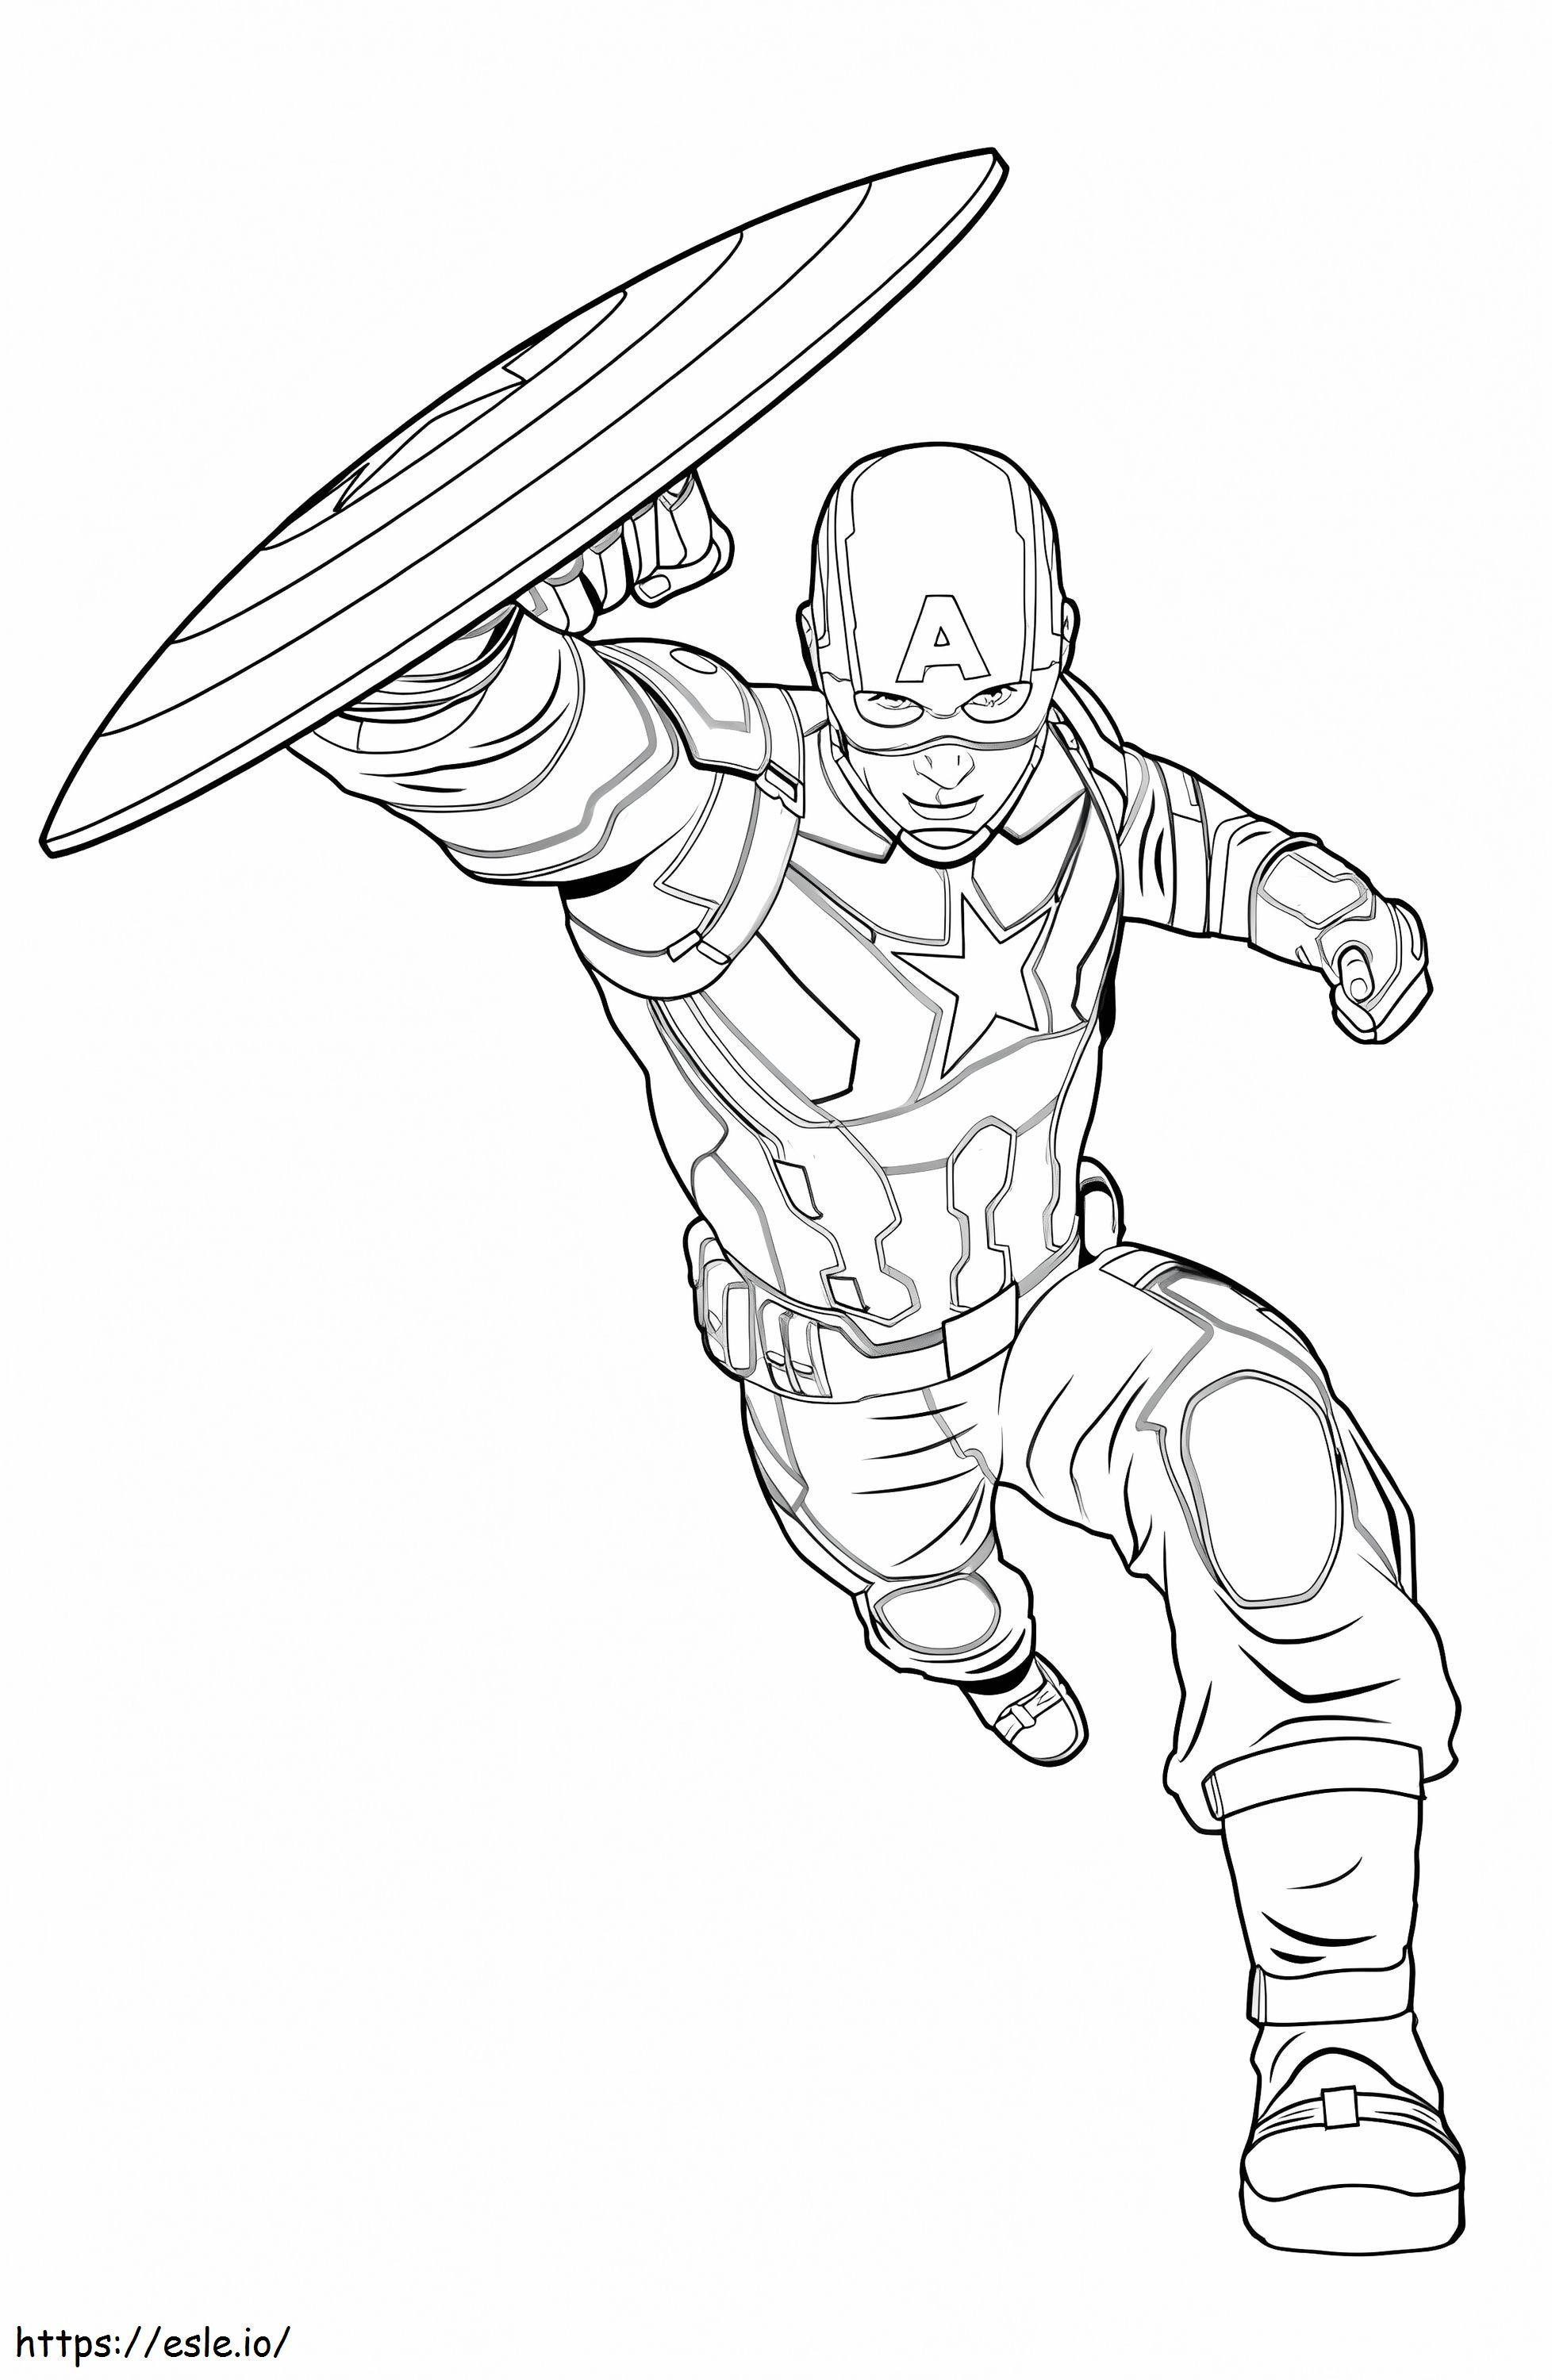 Captain America'S Attack By Chris coloring page